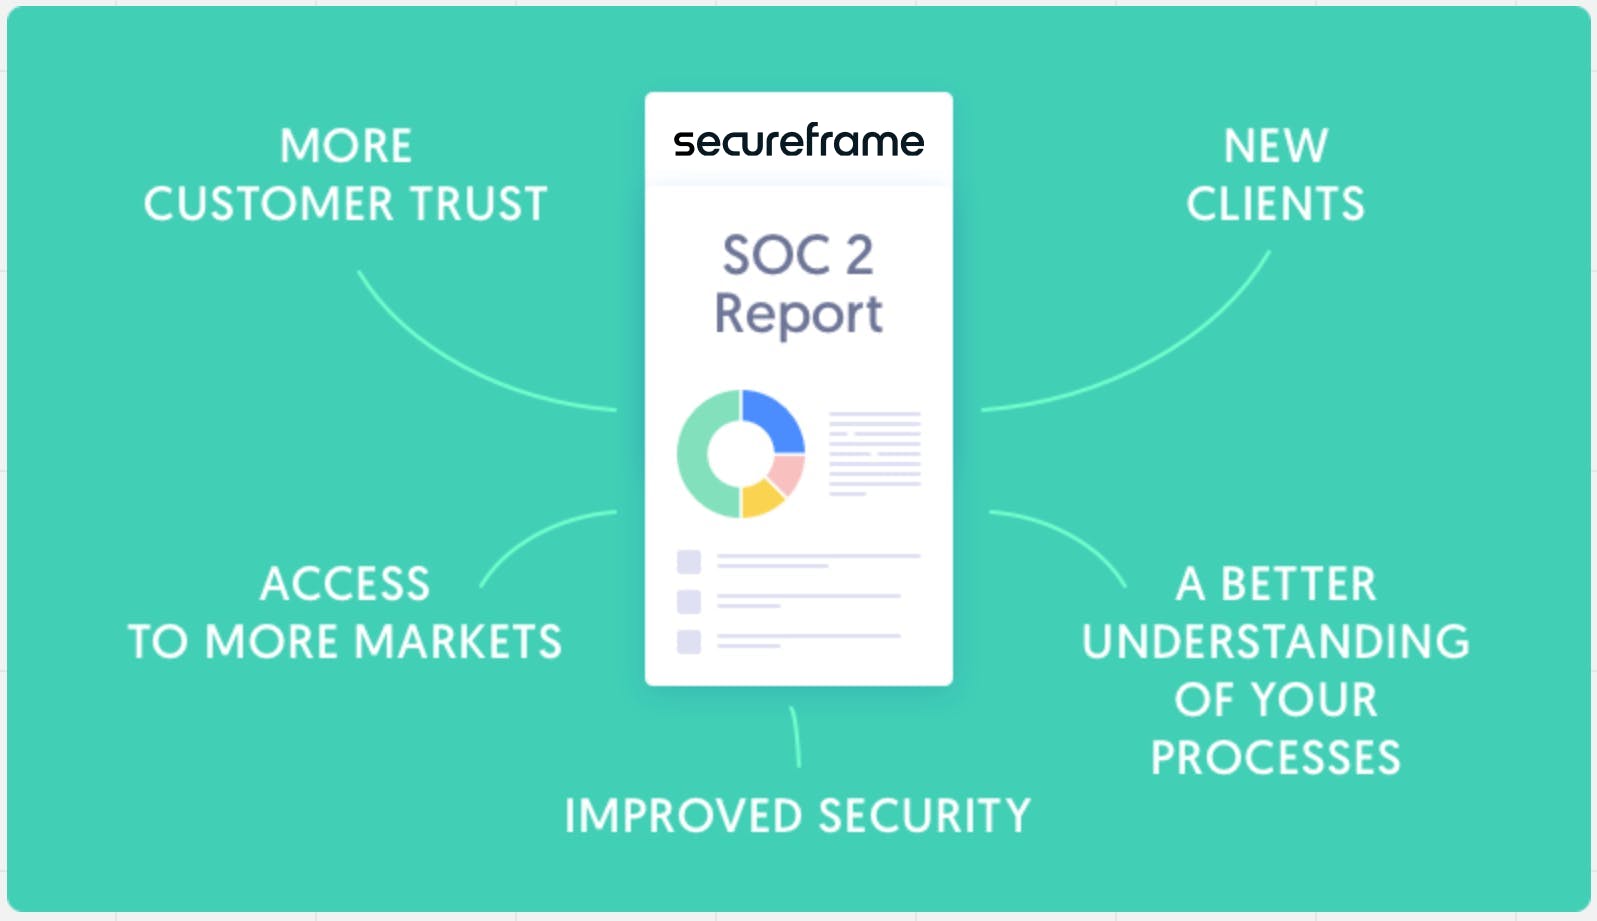 SOC 2 report benefits include more customer trust, improved security, access to more markets, new clients, and a better understanding of processes processes